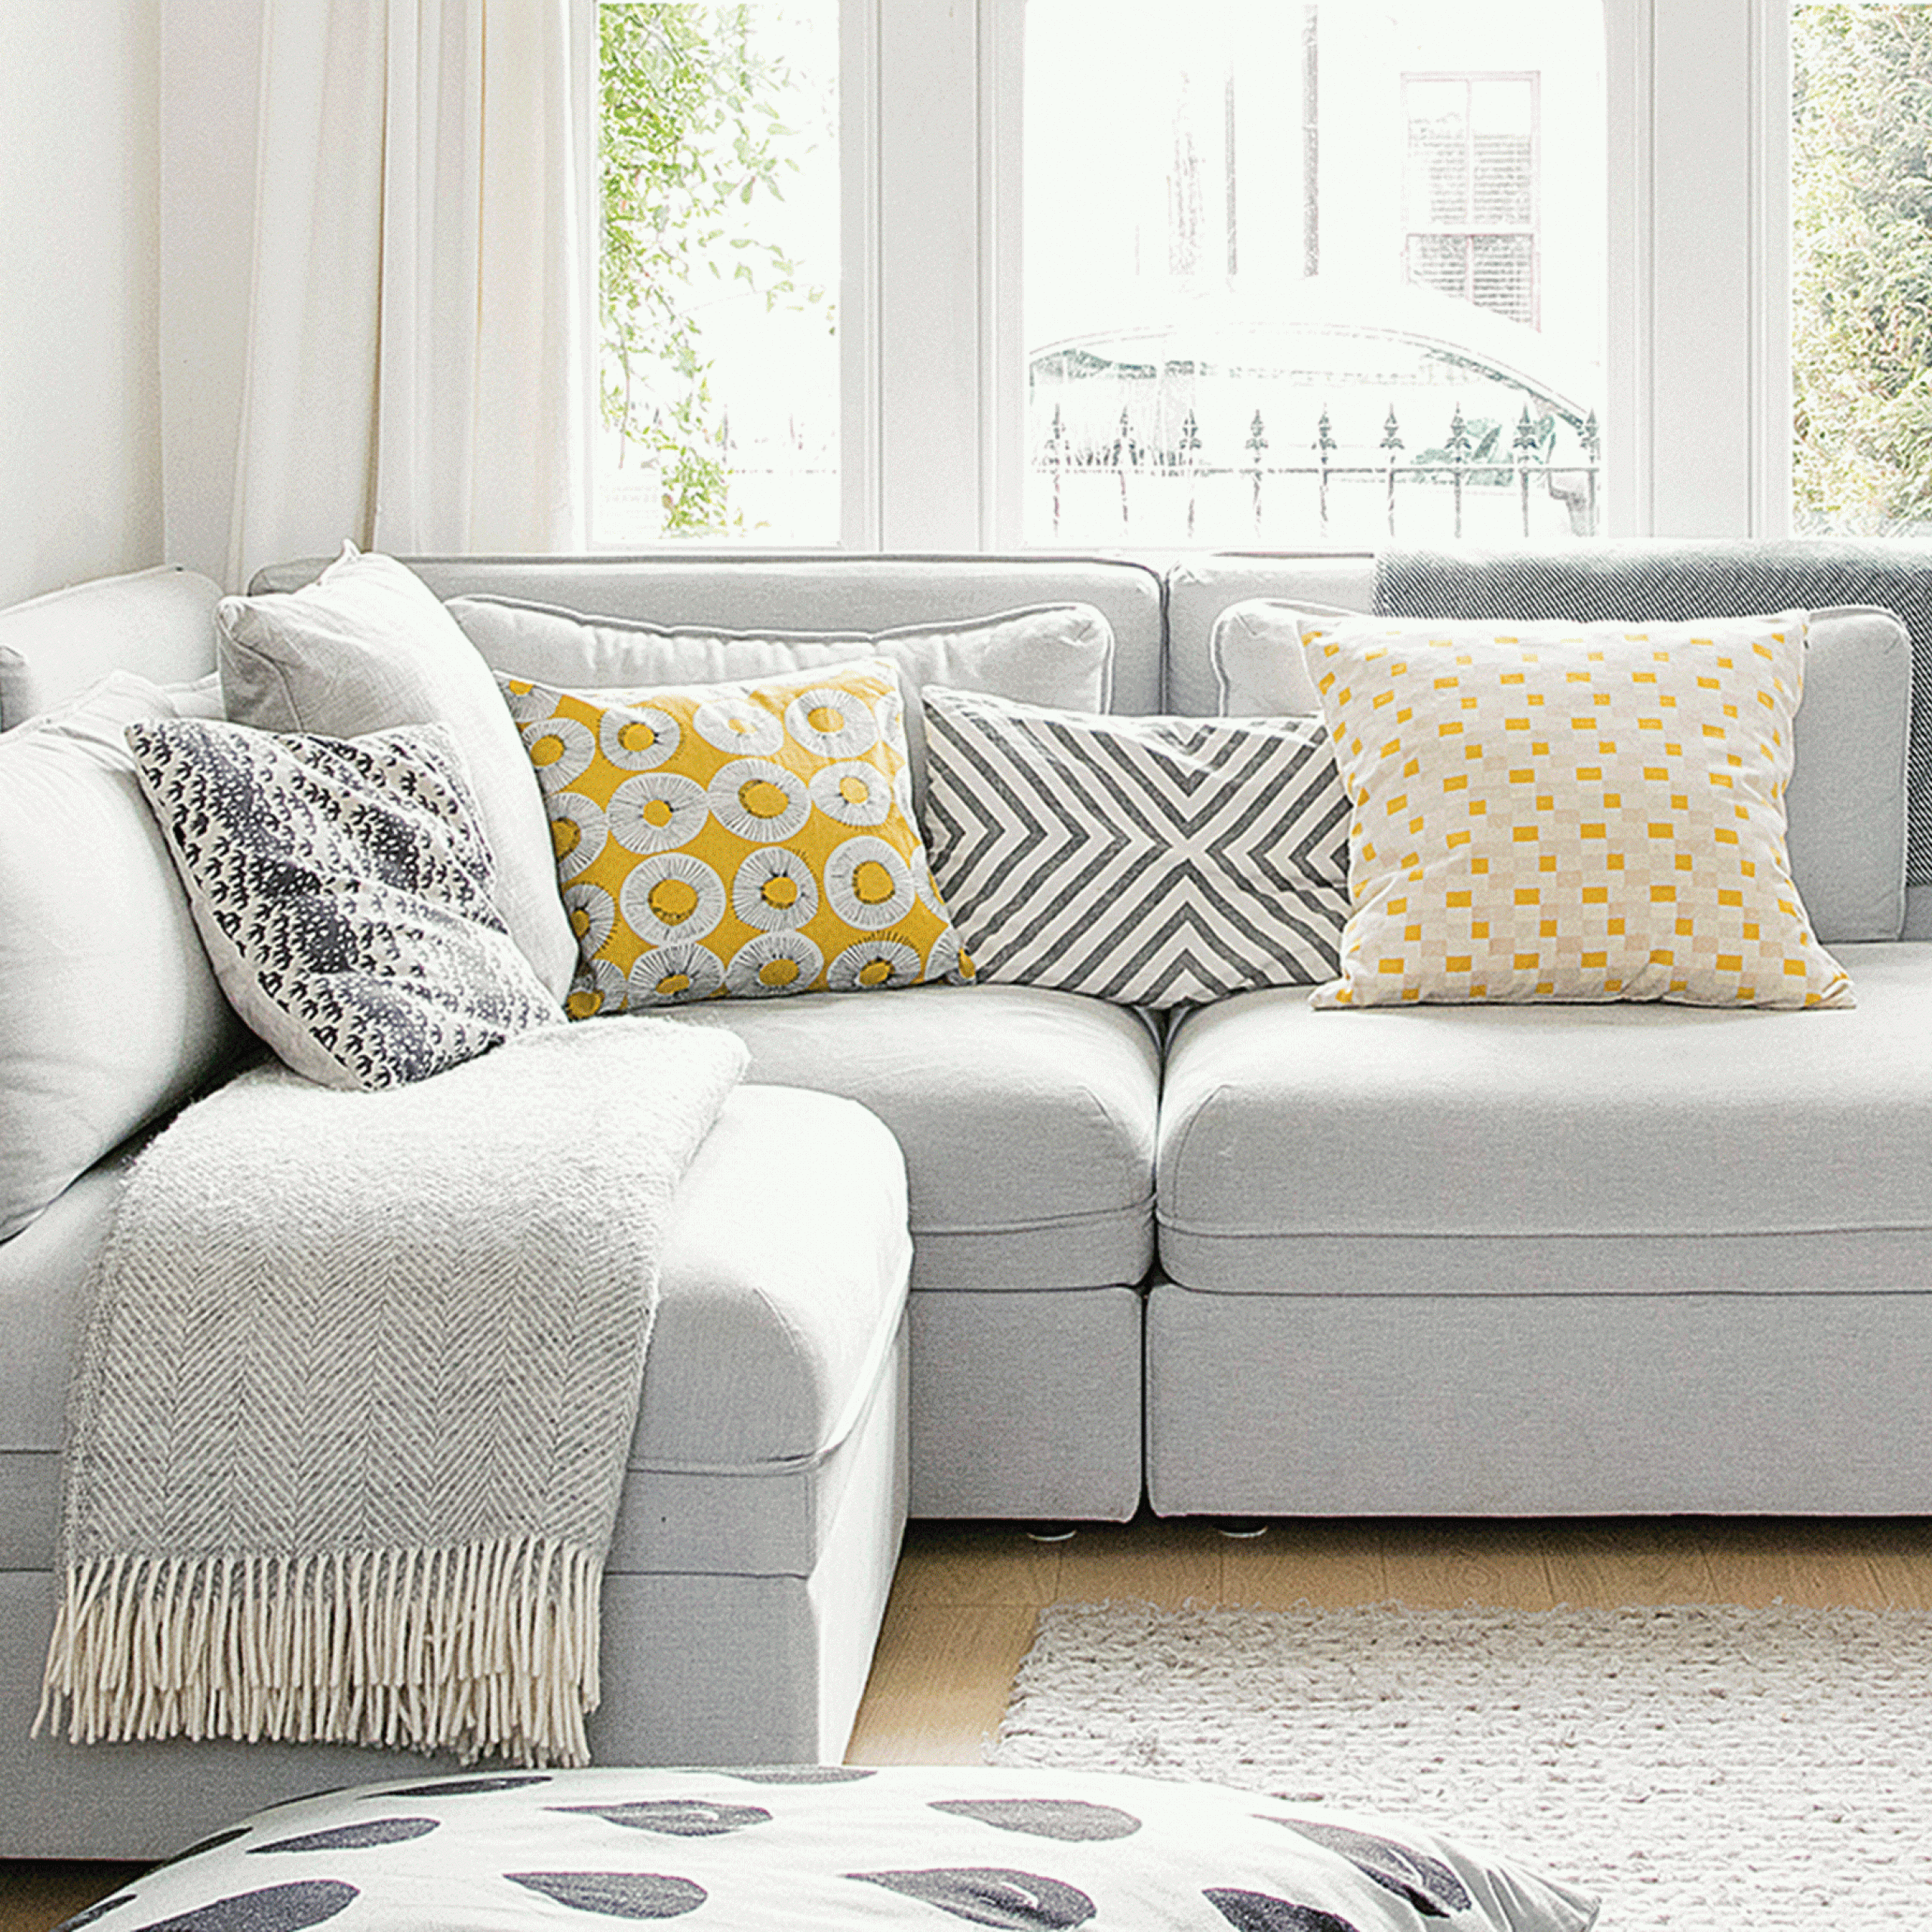 16 Sofa Ideas For Small Living Rooms: Looks, Styles And Tips | Ideal Home Throughout Sofas For Small Spaces (View 3 of 15)